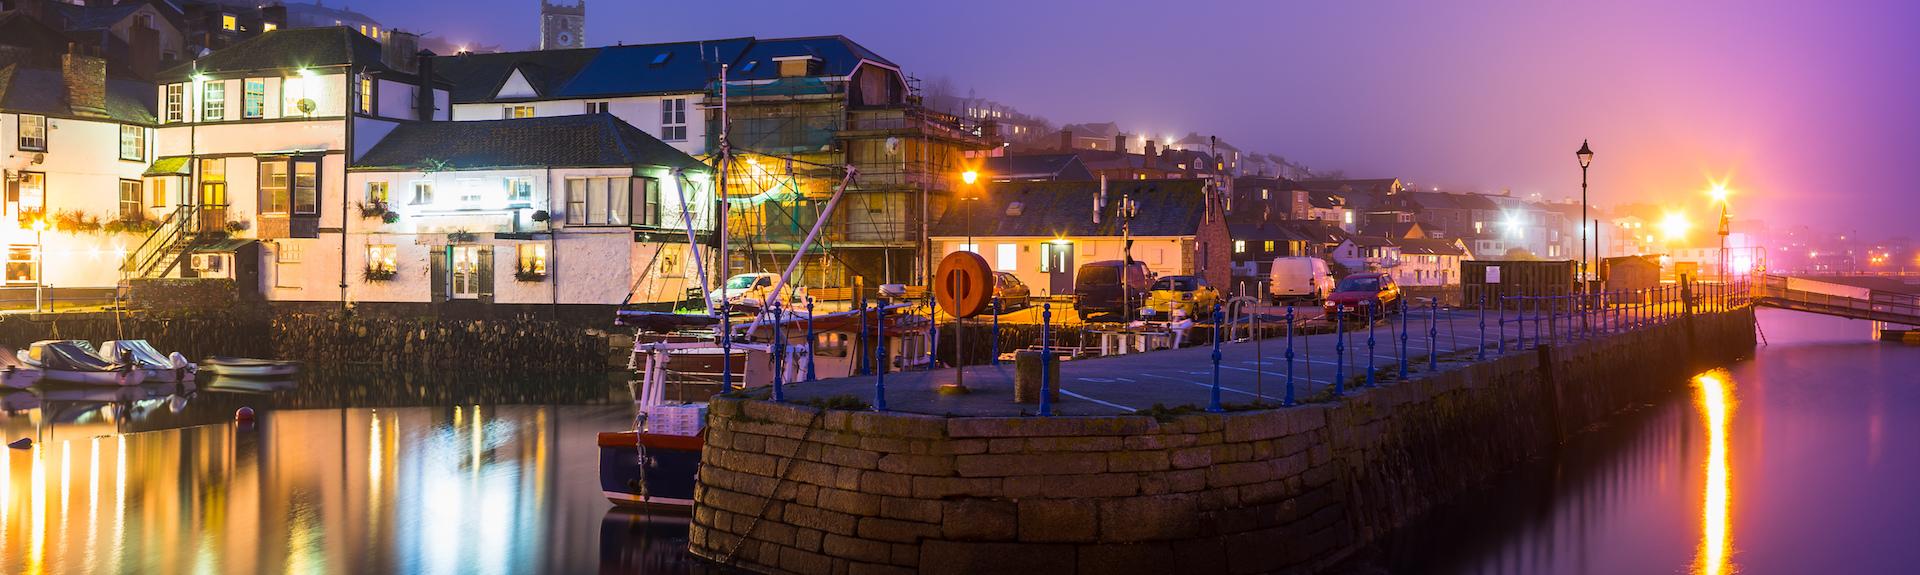 Falmouth Quay illuminations reflect on the water after dark,